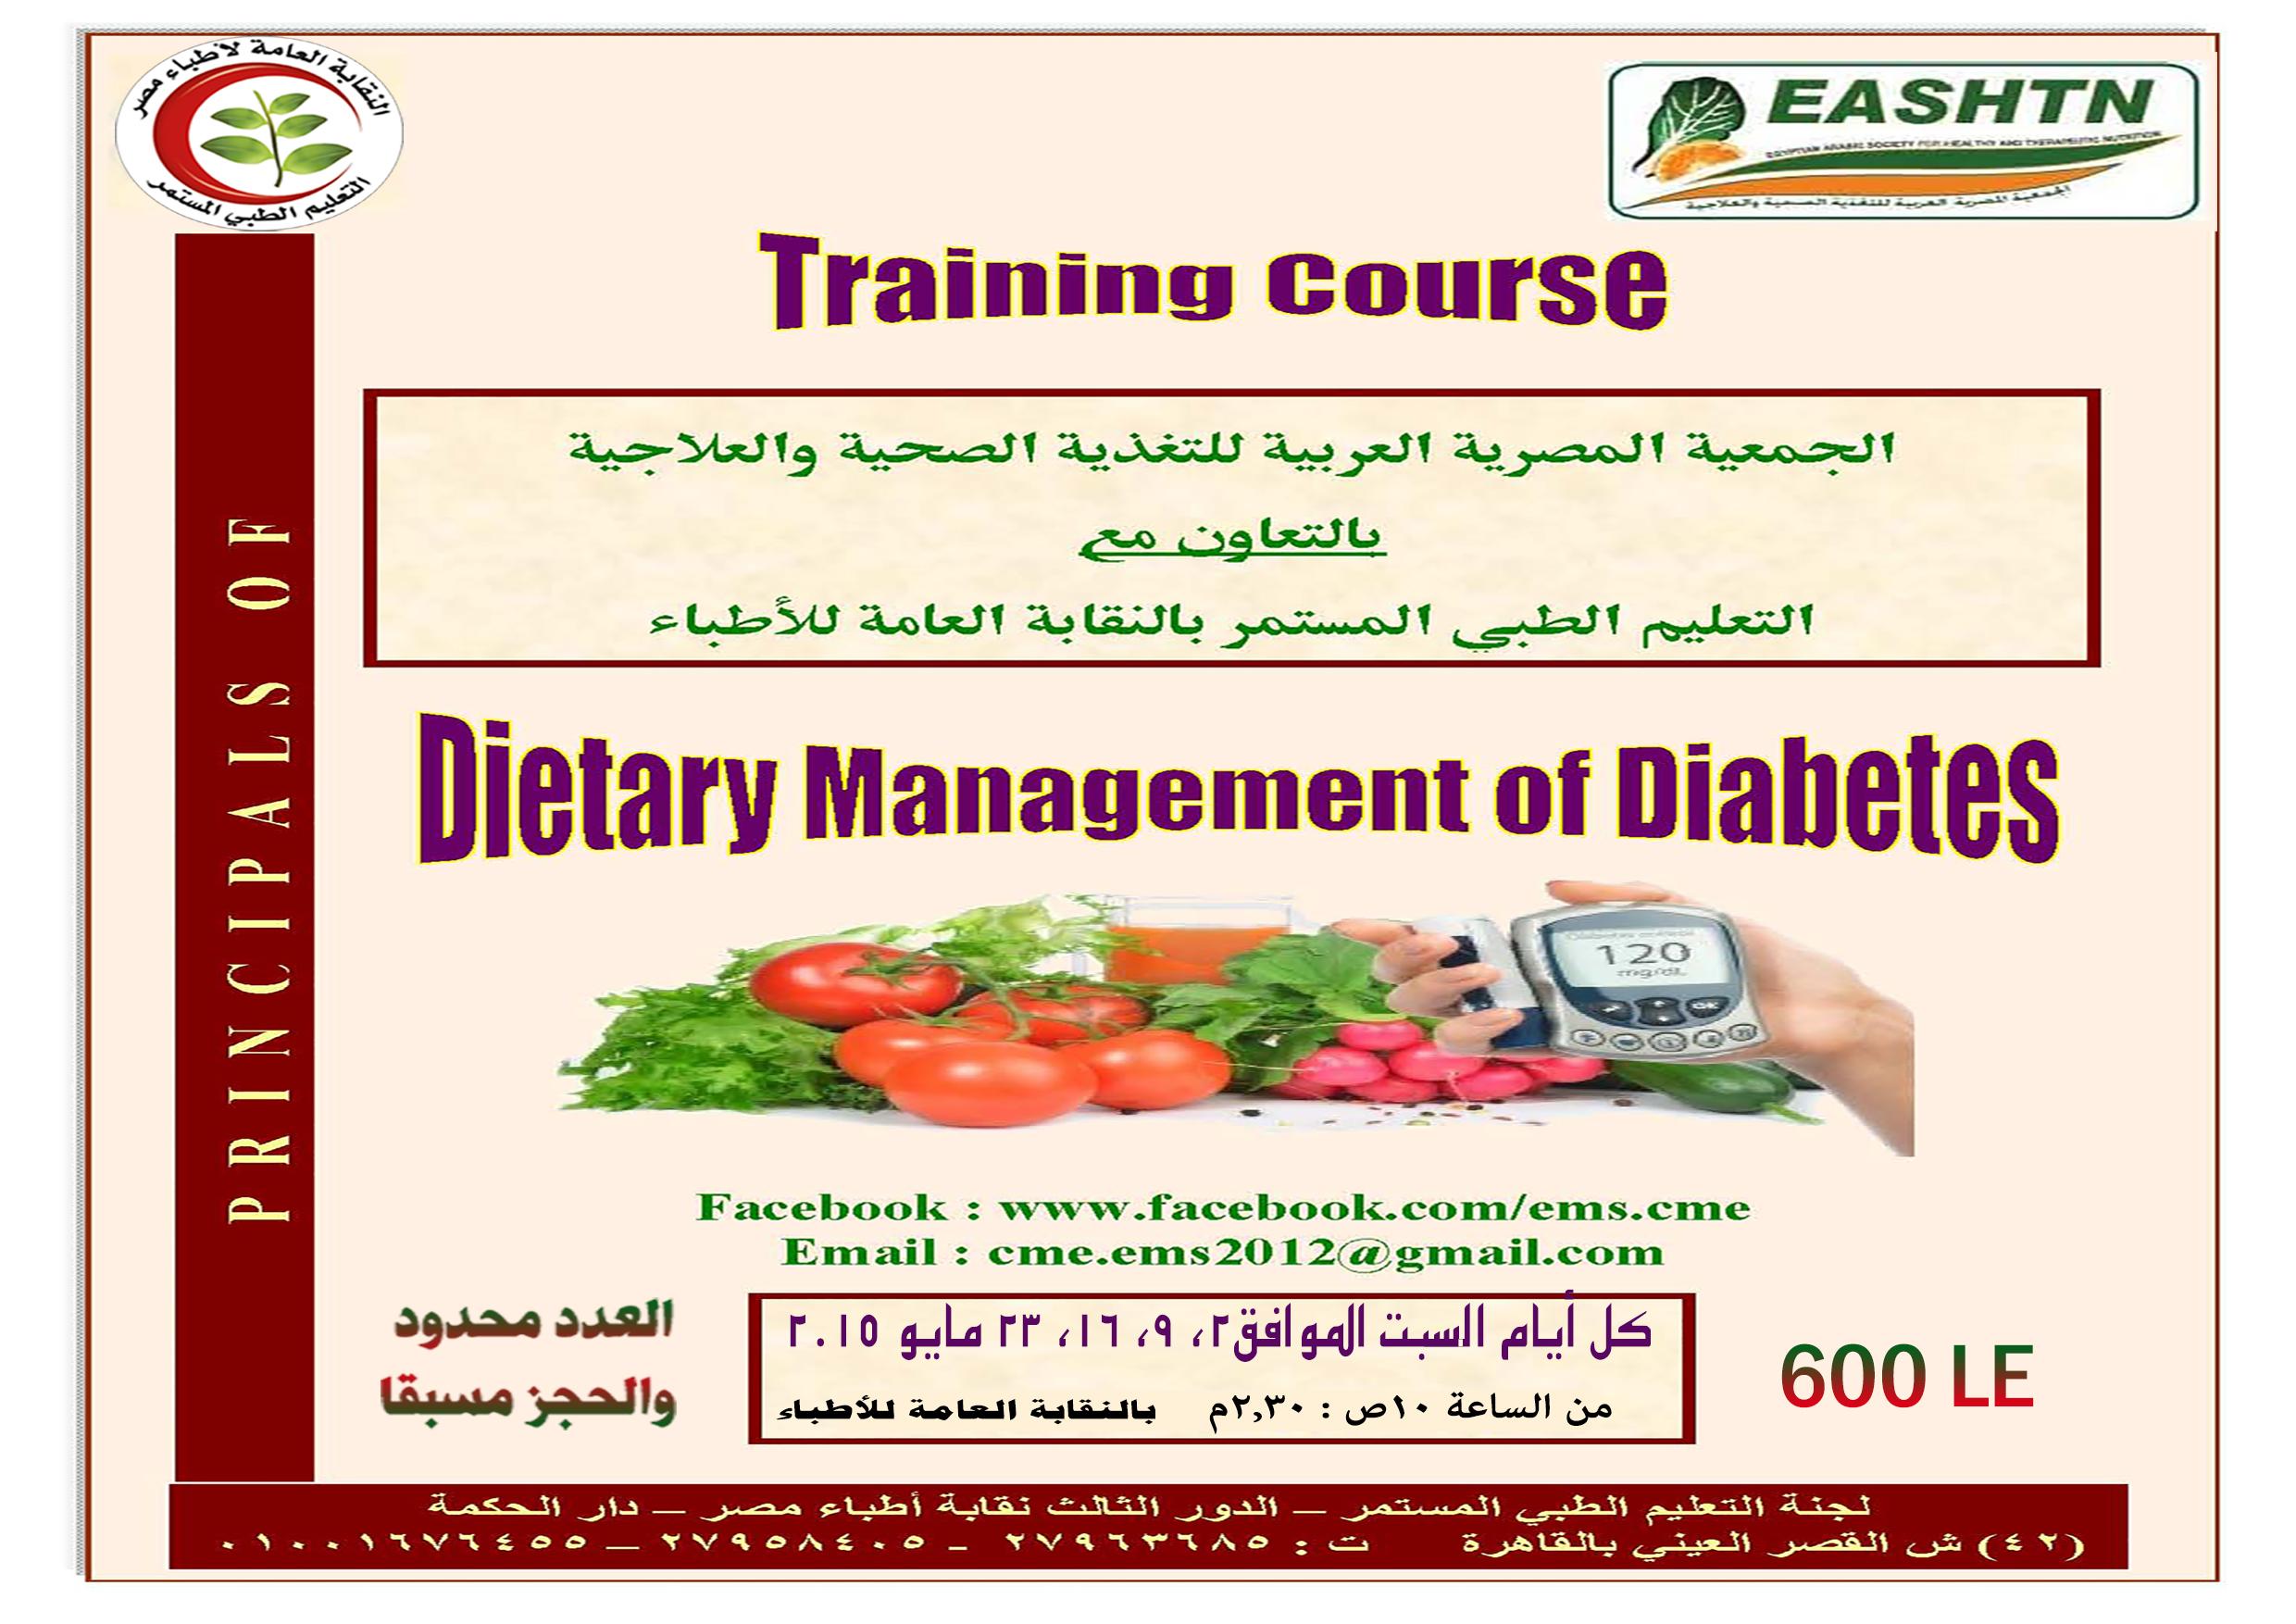 (Dietary Management of Diabetes) Training Course